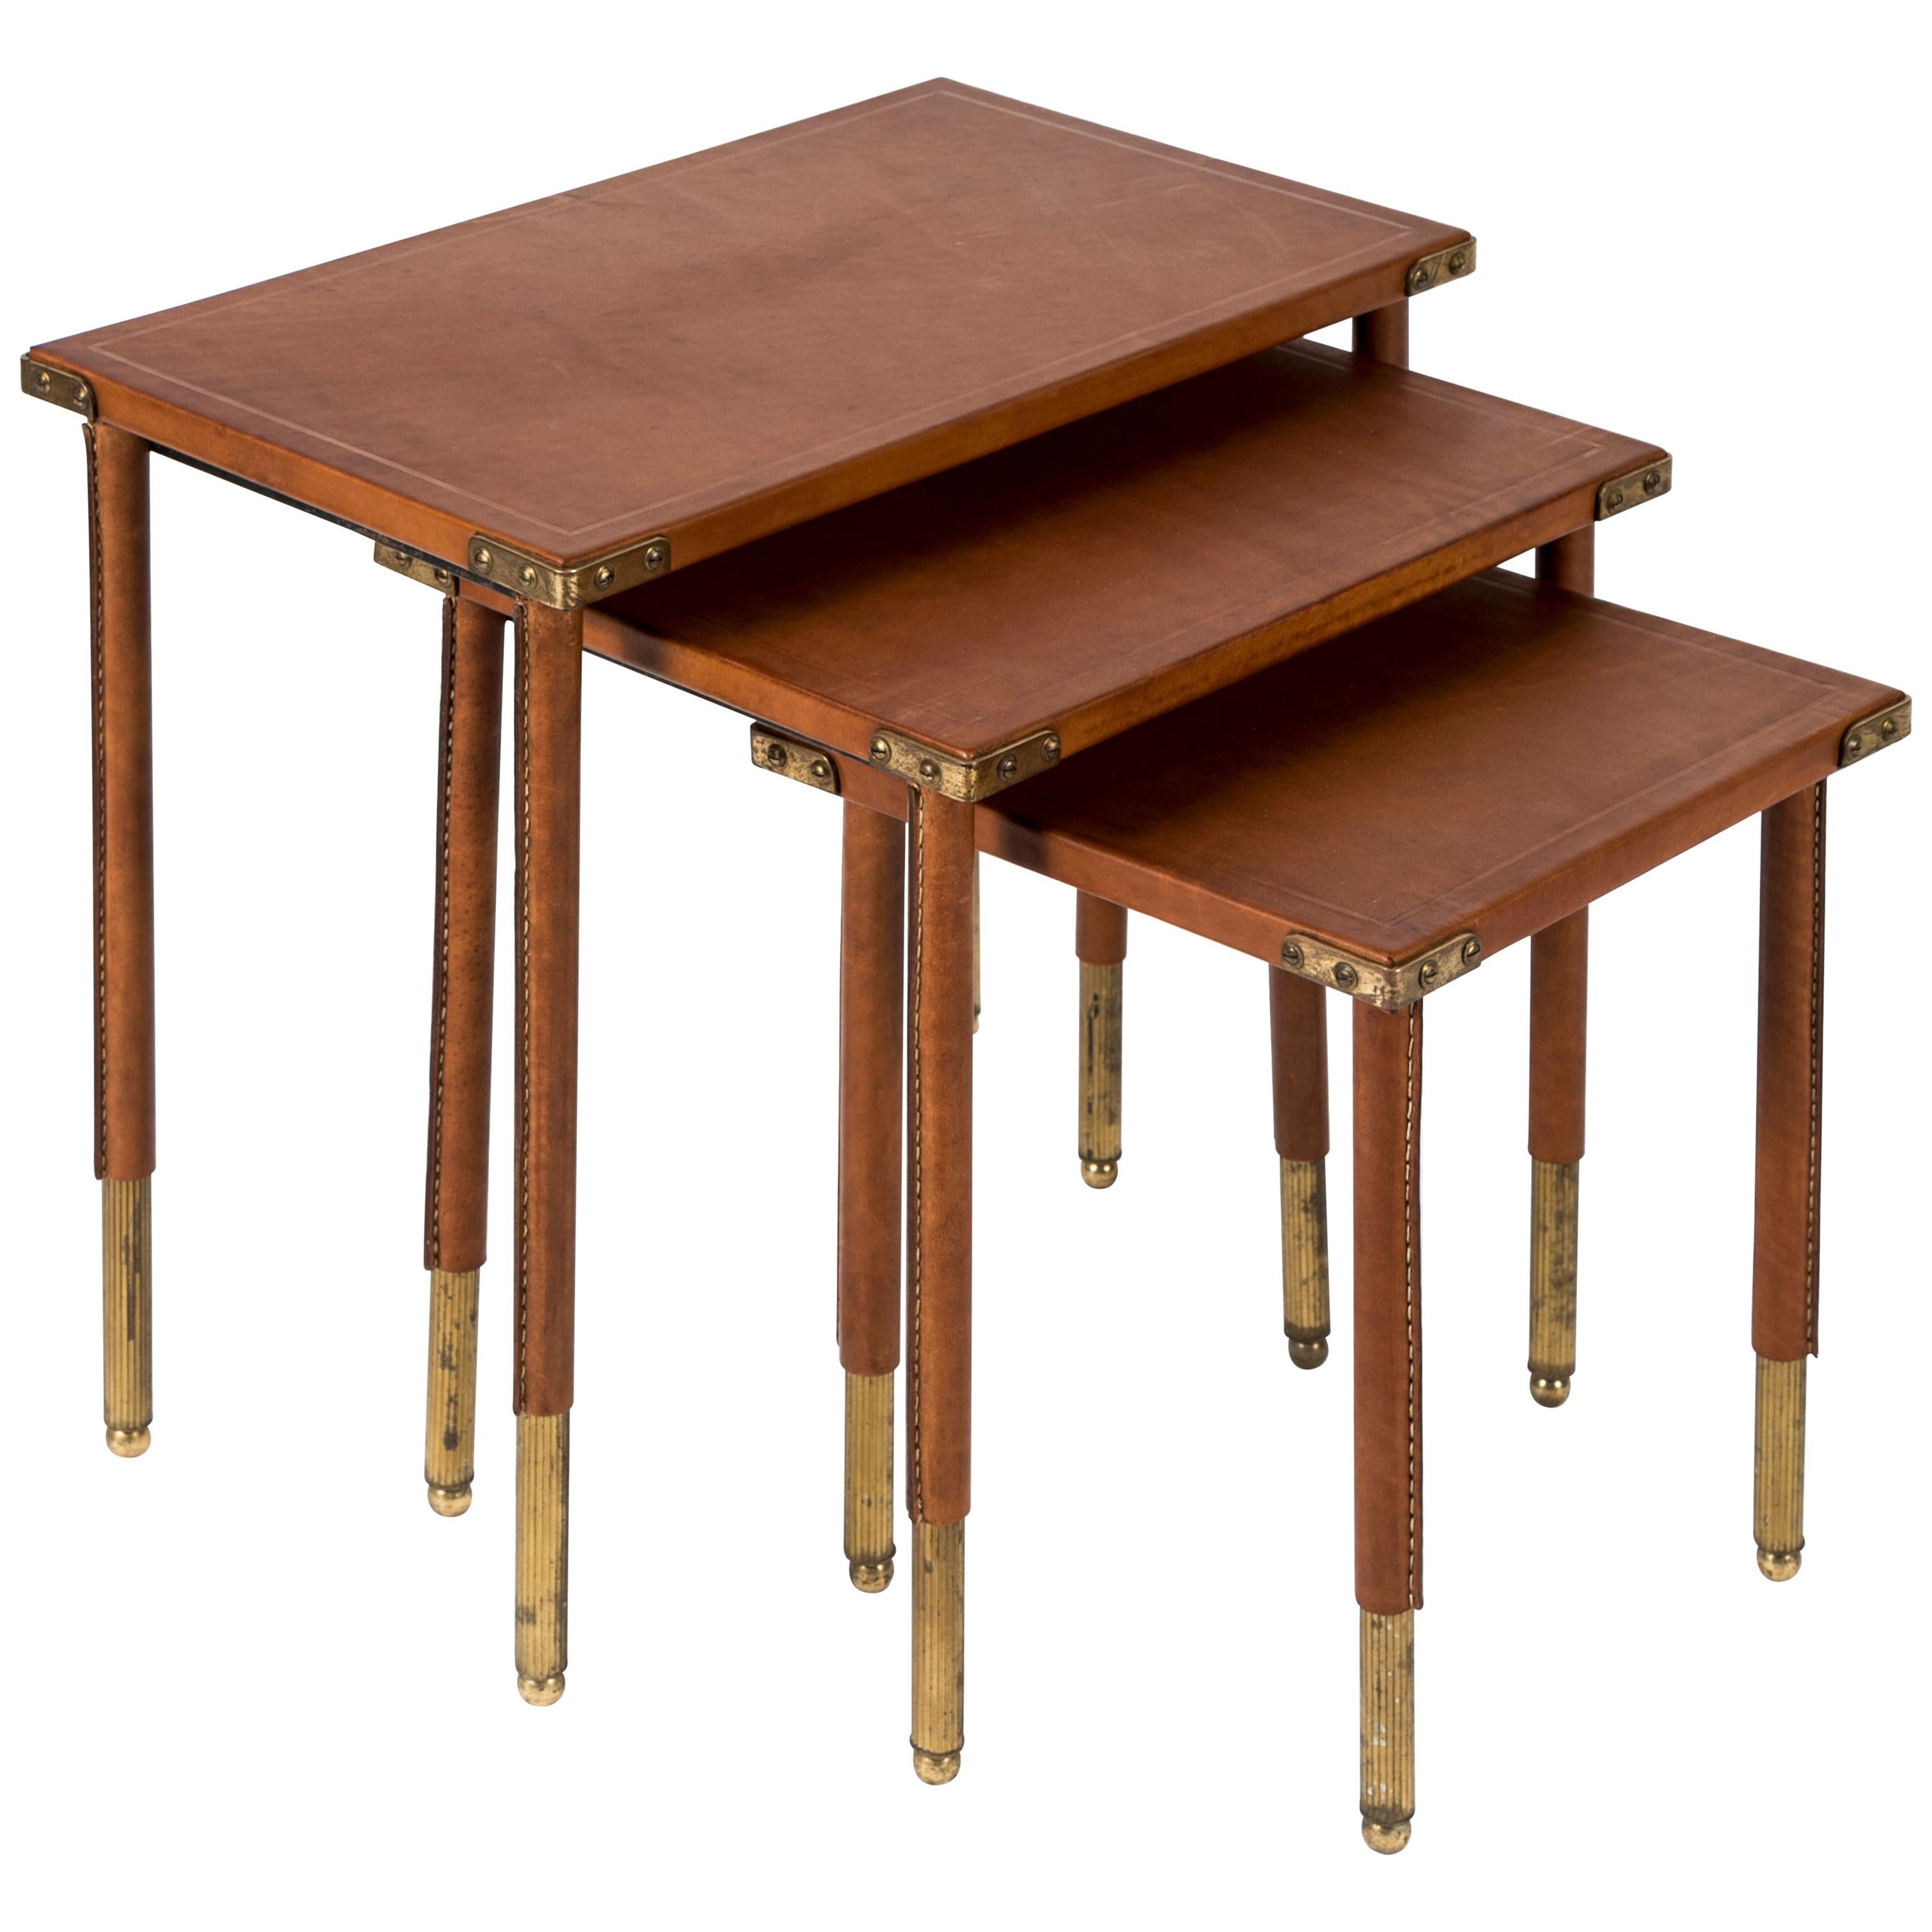 Rare Set of 3 Nesting Tables in Stitched Leather by Jacques Adnet